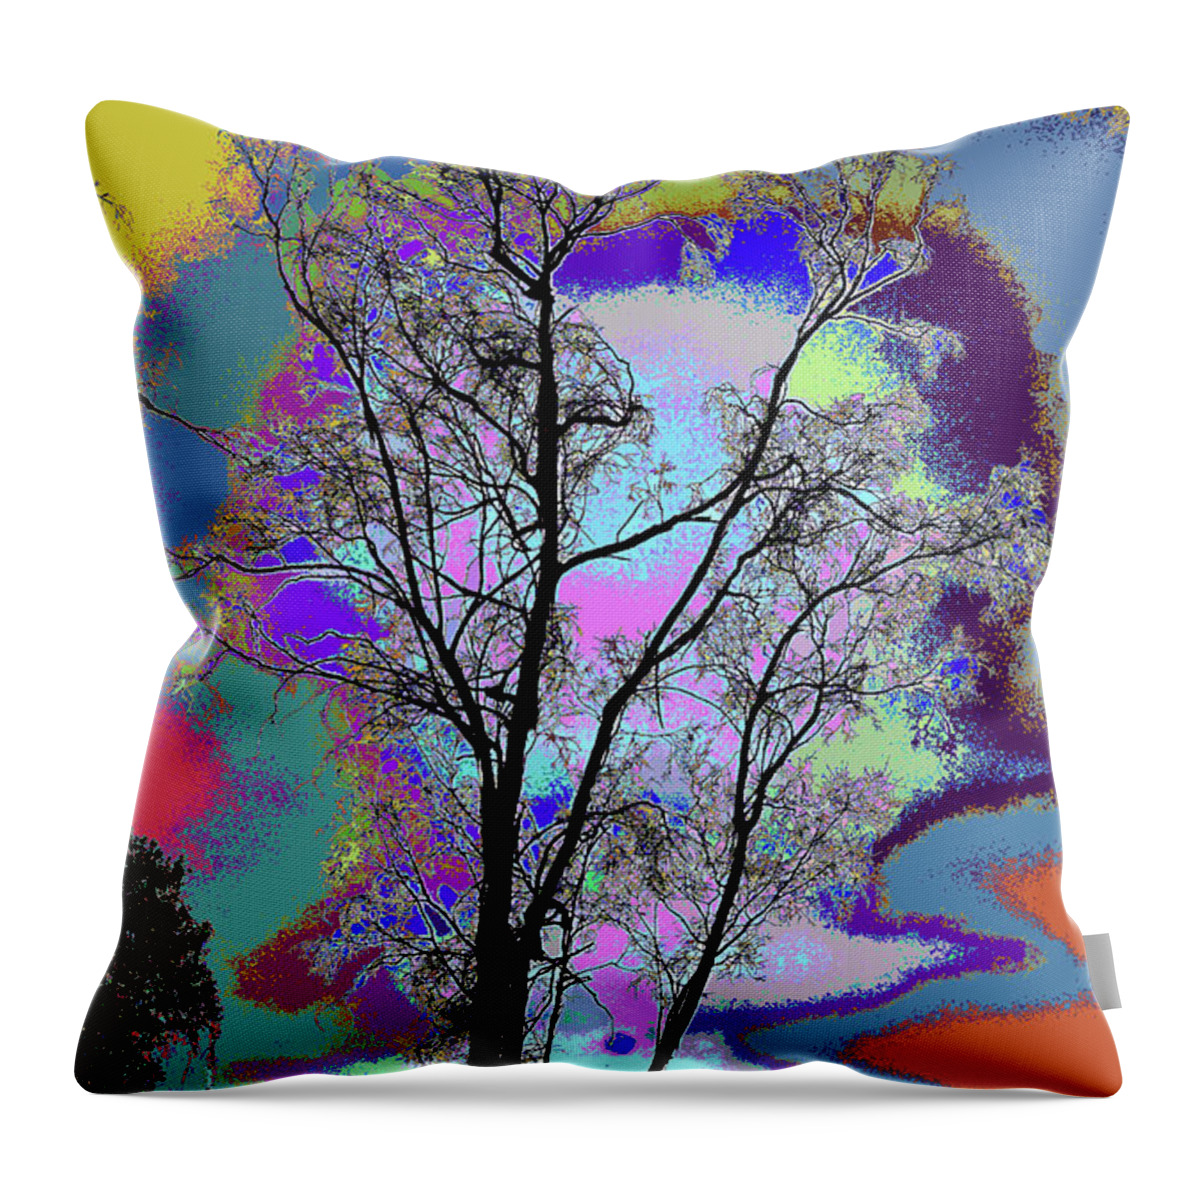 Tree - Story Of Life Throw Pillow featuring the photograph Tree - Story Of Life by Kenneth James